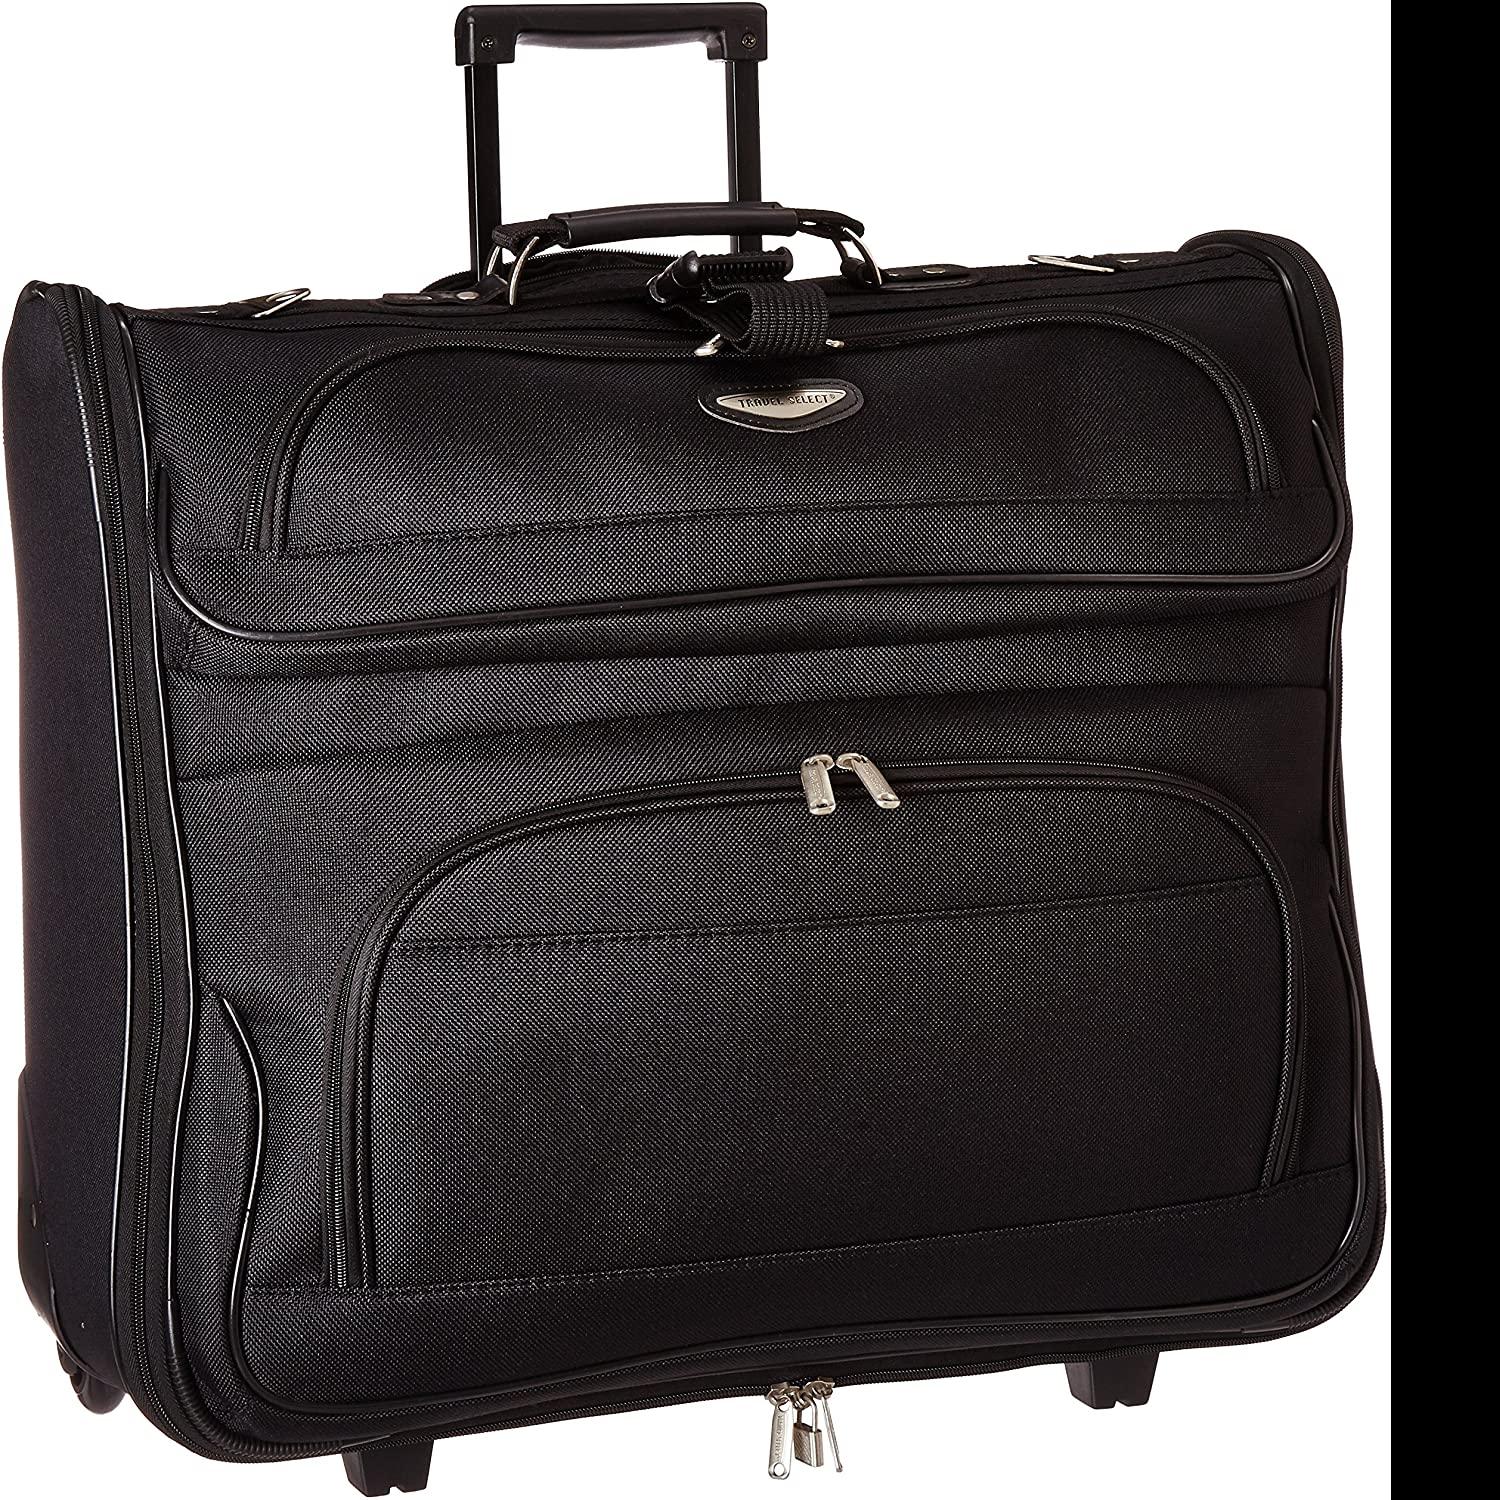 Travel Select Amsterdam Business Rolling Garment Bag for $19.99